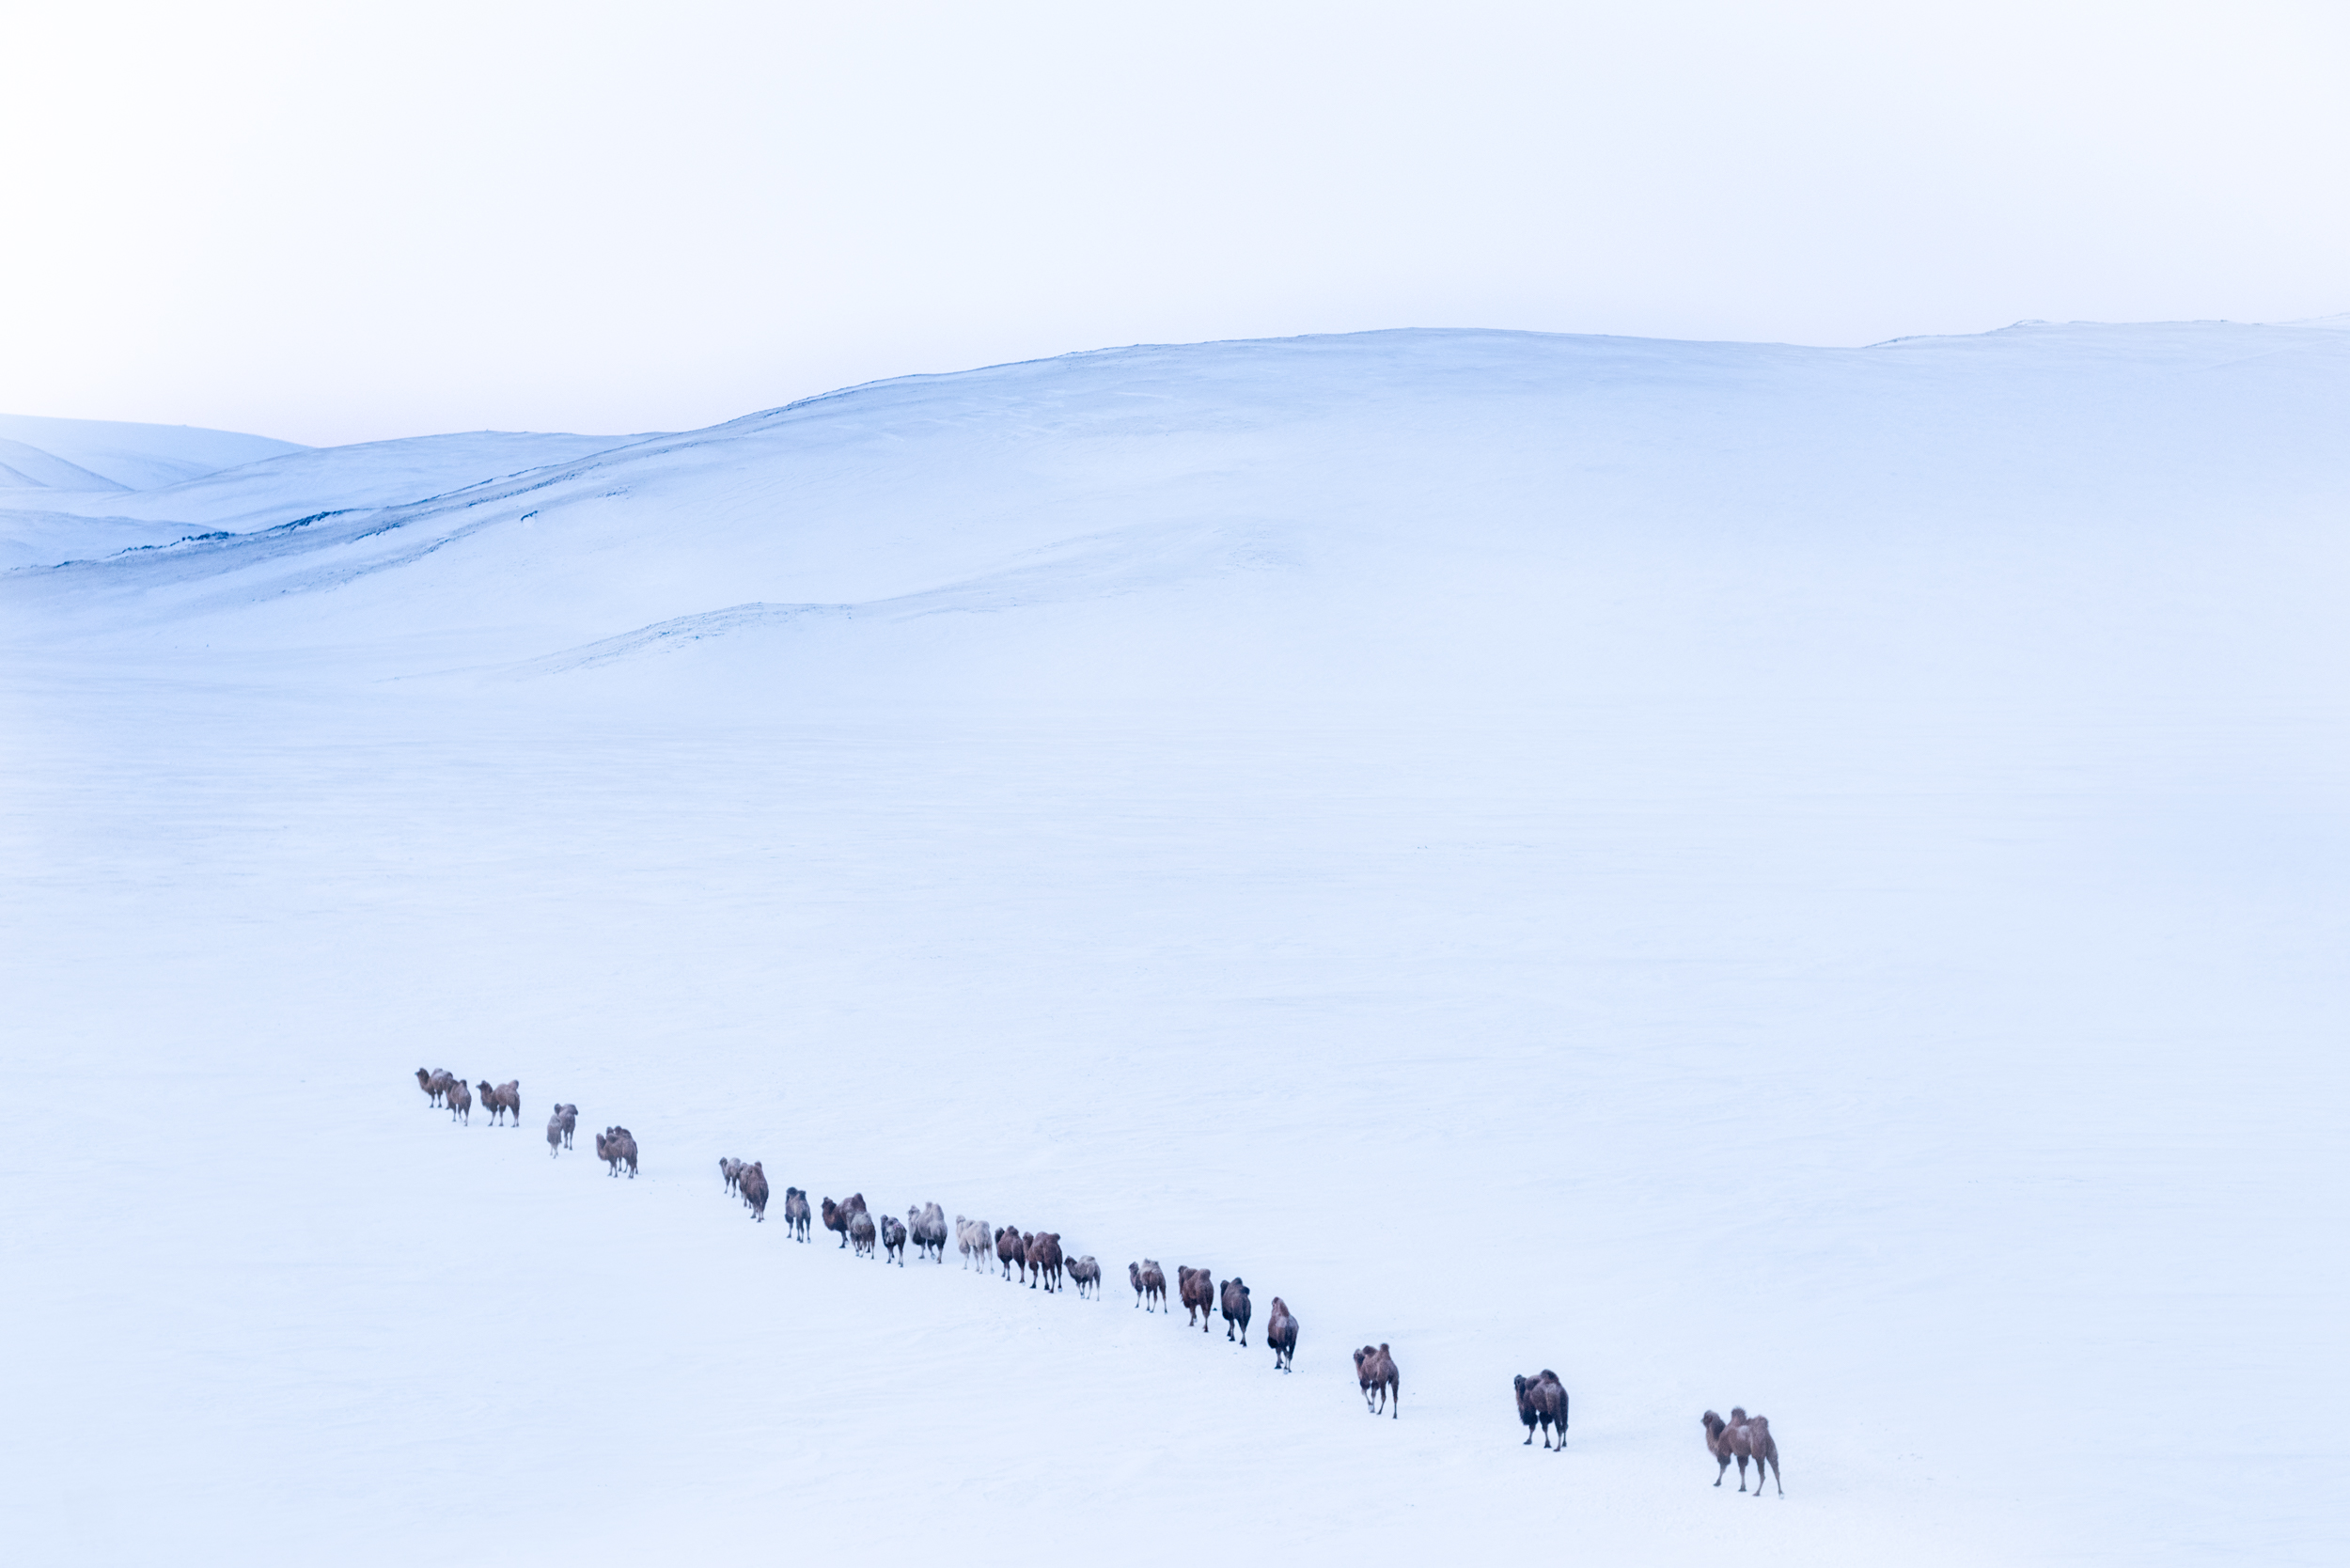 The camels lead the way through the frozen terrain in the Altai Mountains to the nomads "spring place'. The day time temperature is -30C and my shutter finger is frozen.